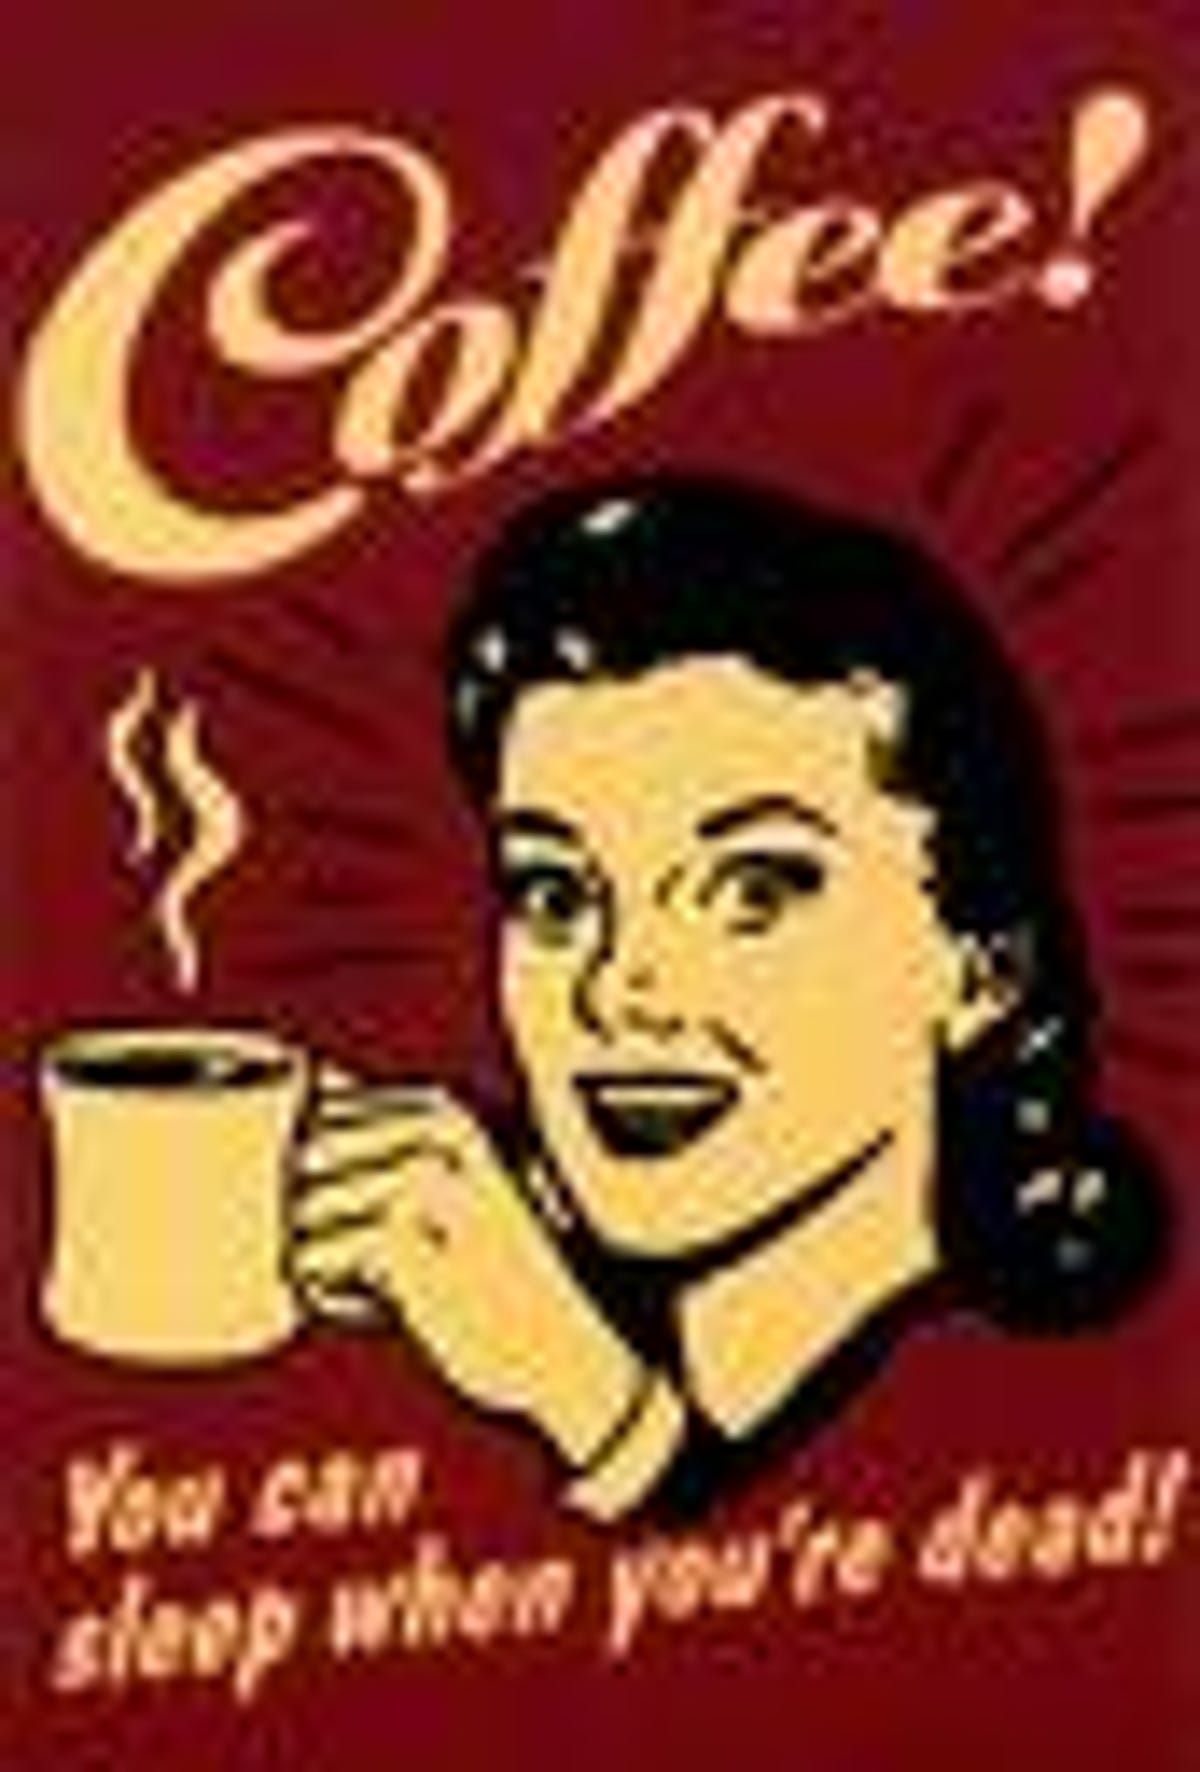 Coffee cures what ails